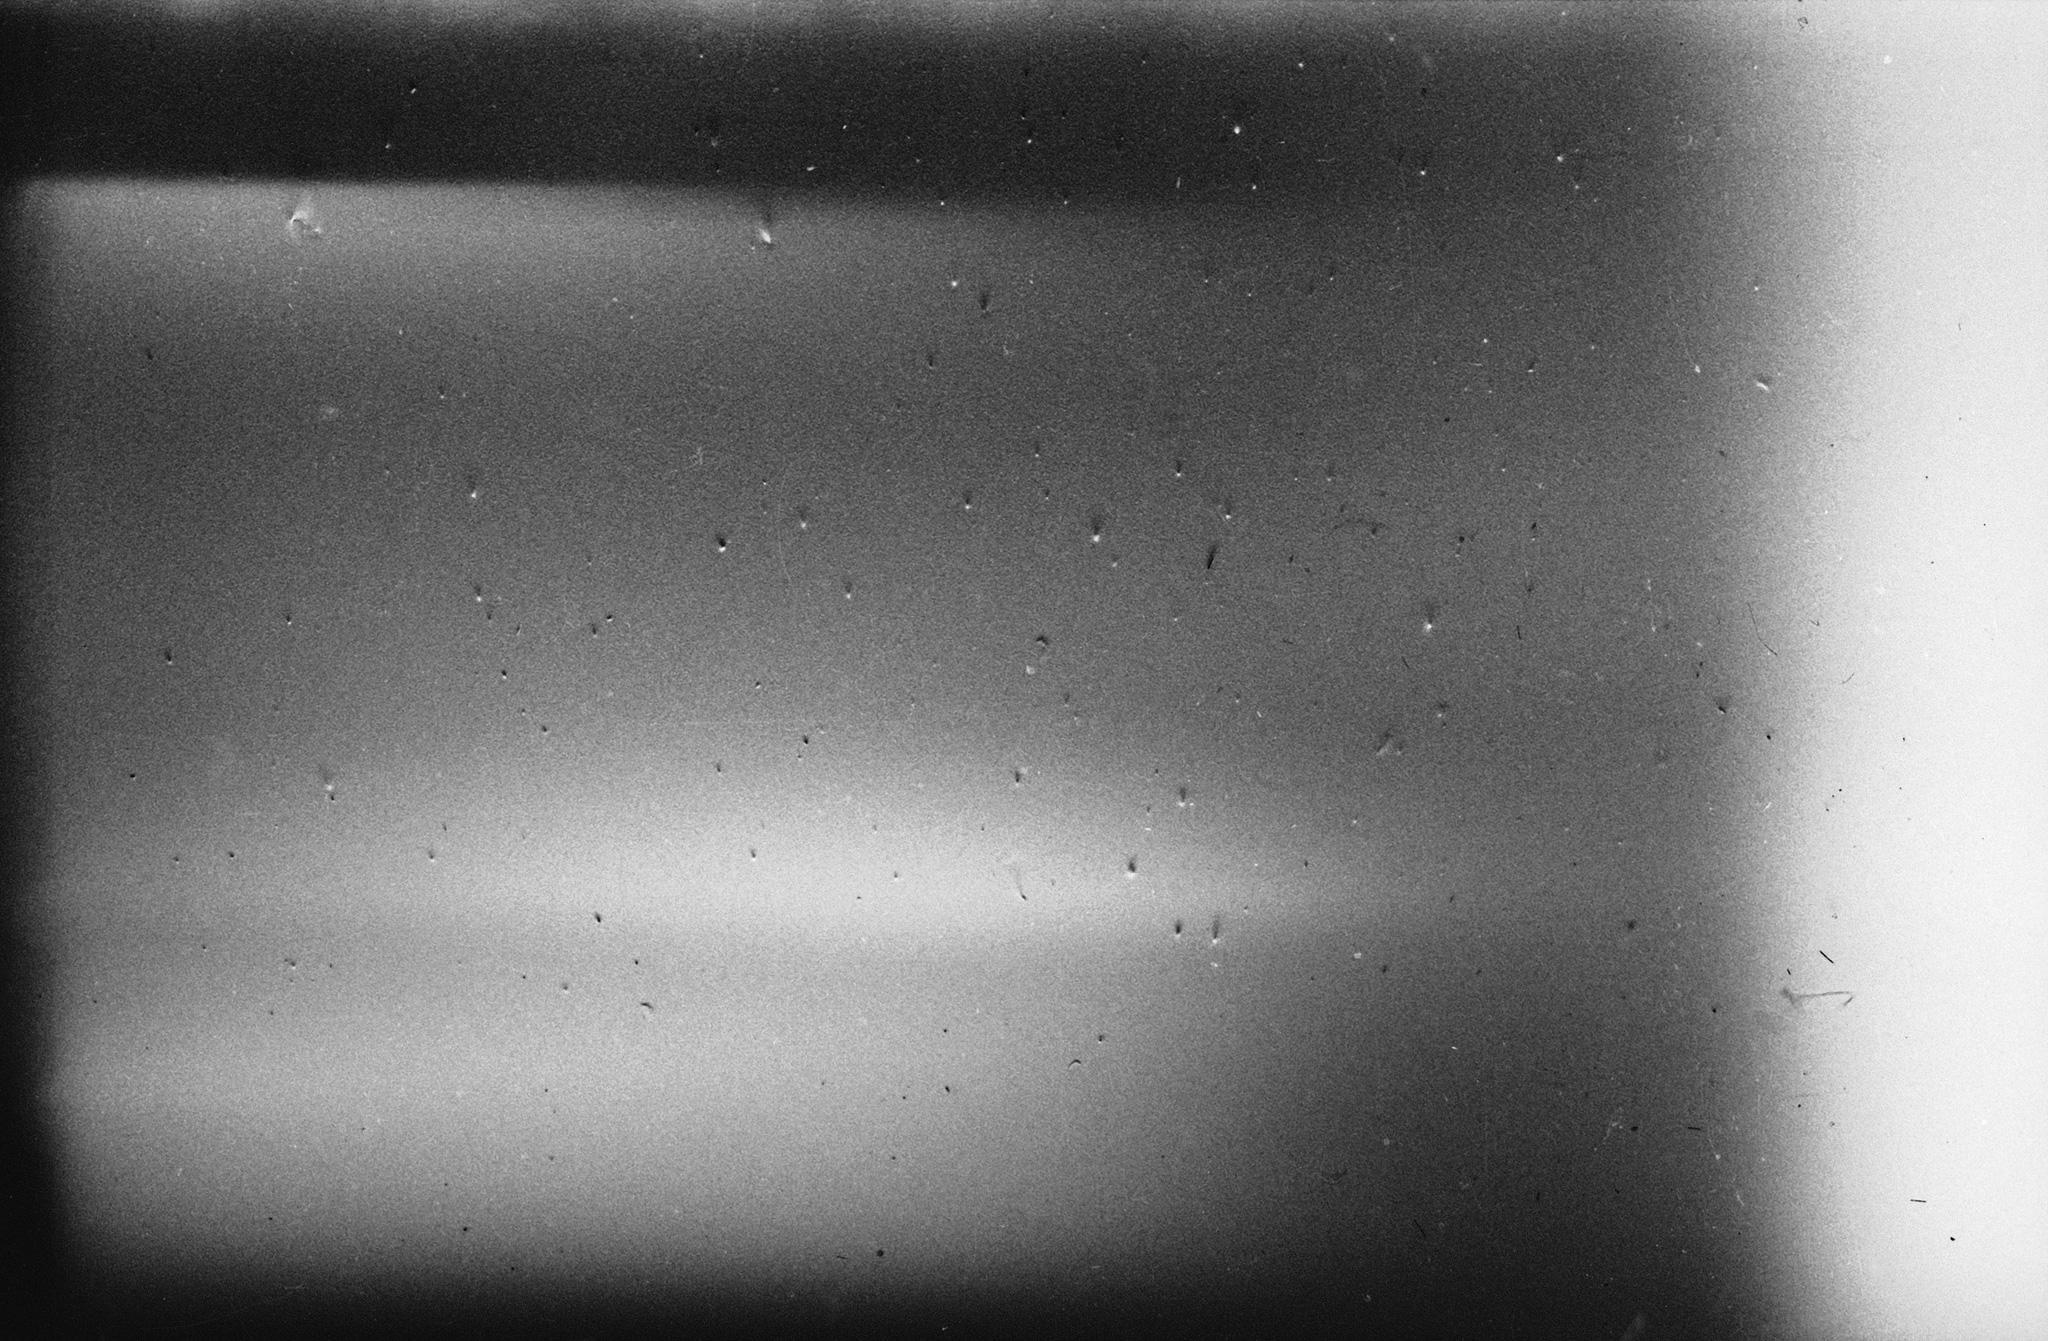 The last frame on the roll of film found in Schutzer's camera. He was killed by a 57mm Egyptian shell which hit the half-track personnel carrier he was riding in, June 5, 1967, the first day of the Arab-Israeli Six Day War.